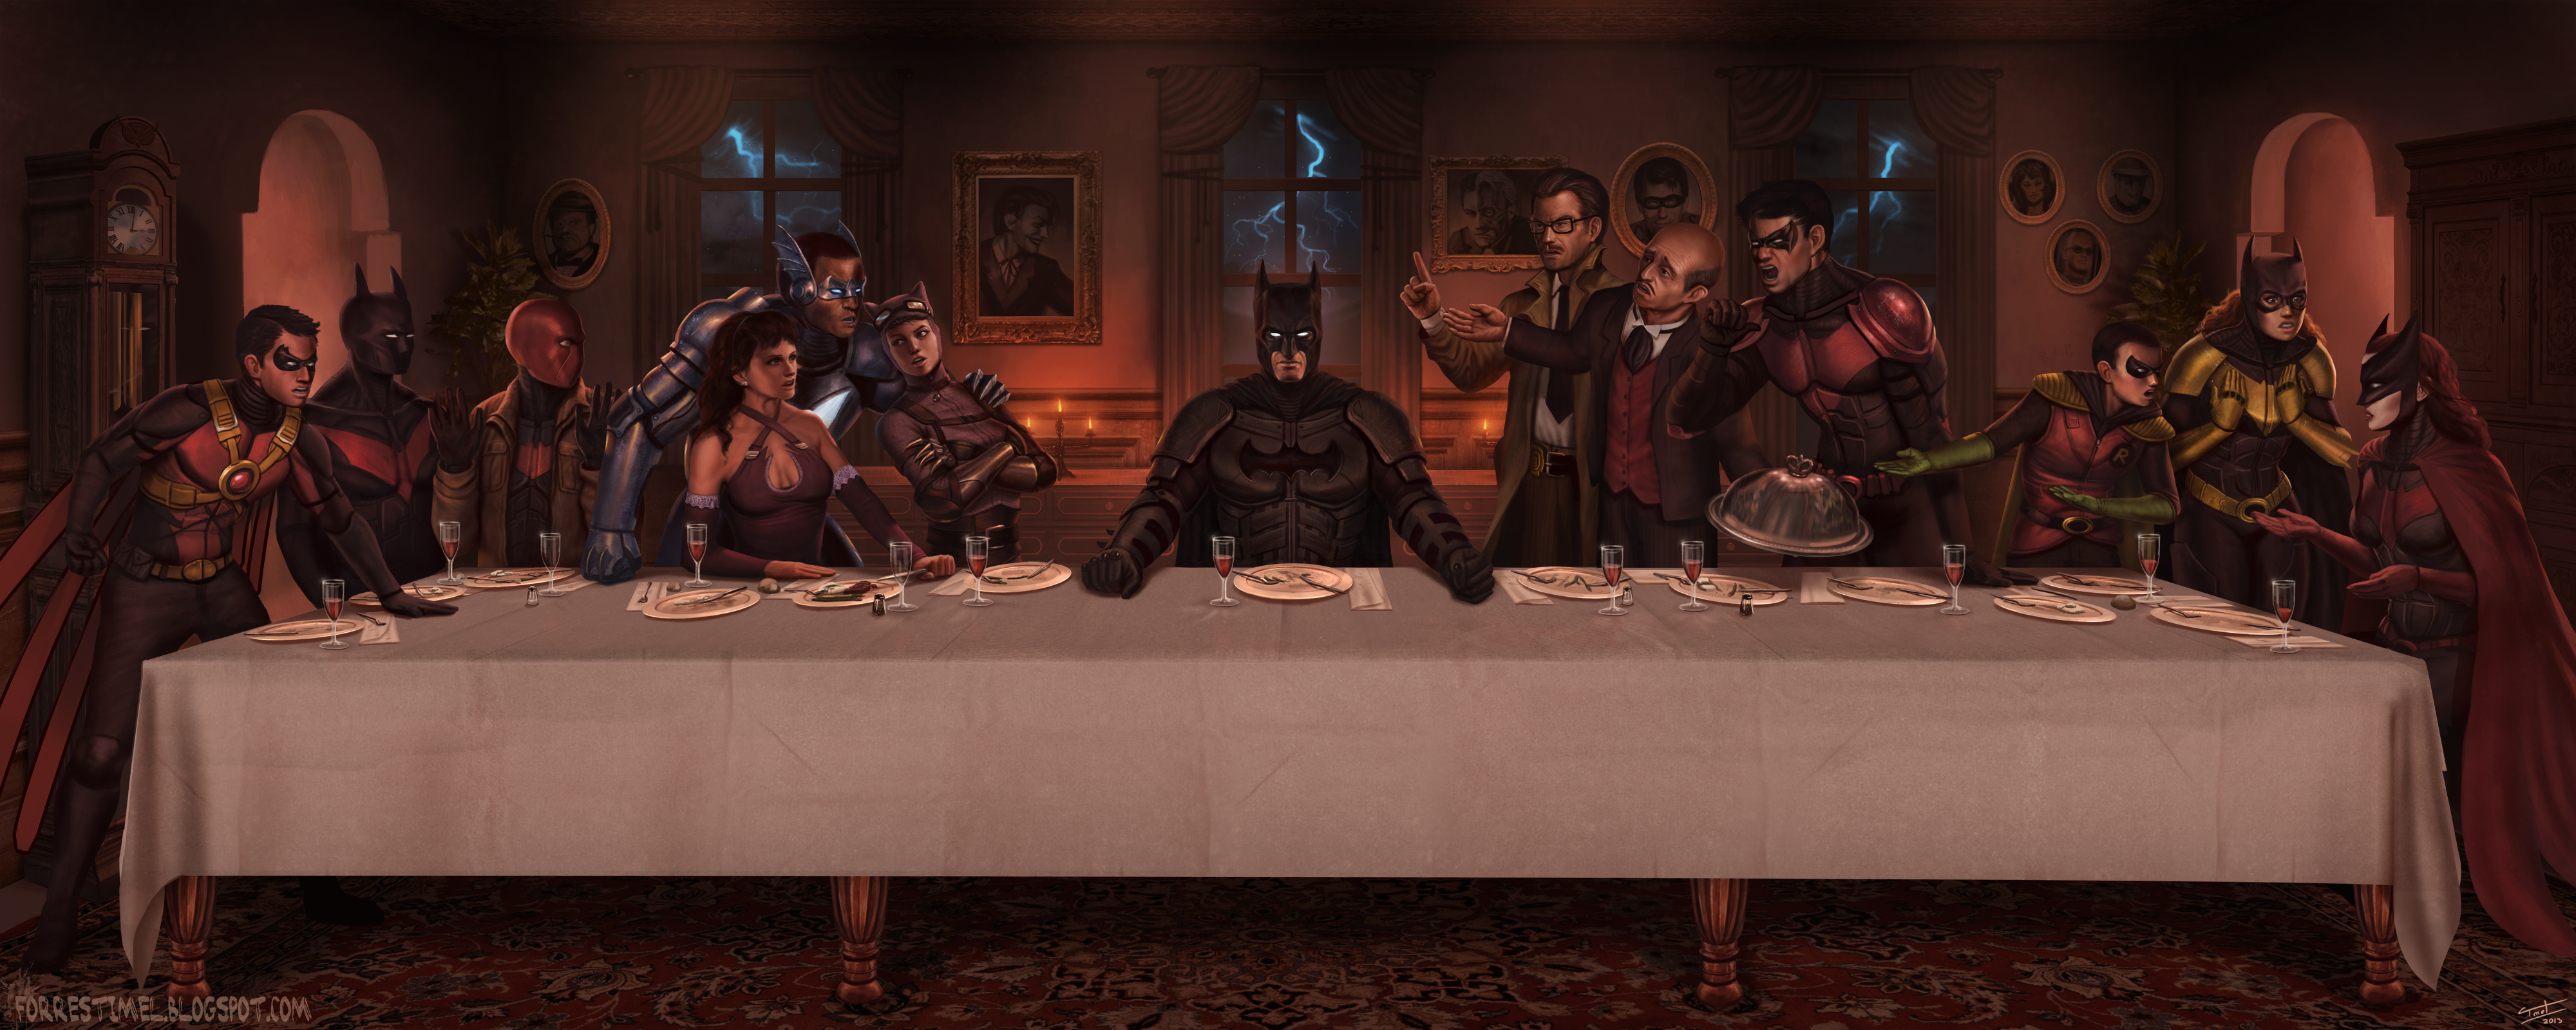 the_last_supper_at_wayne_manor_by_forres